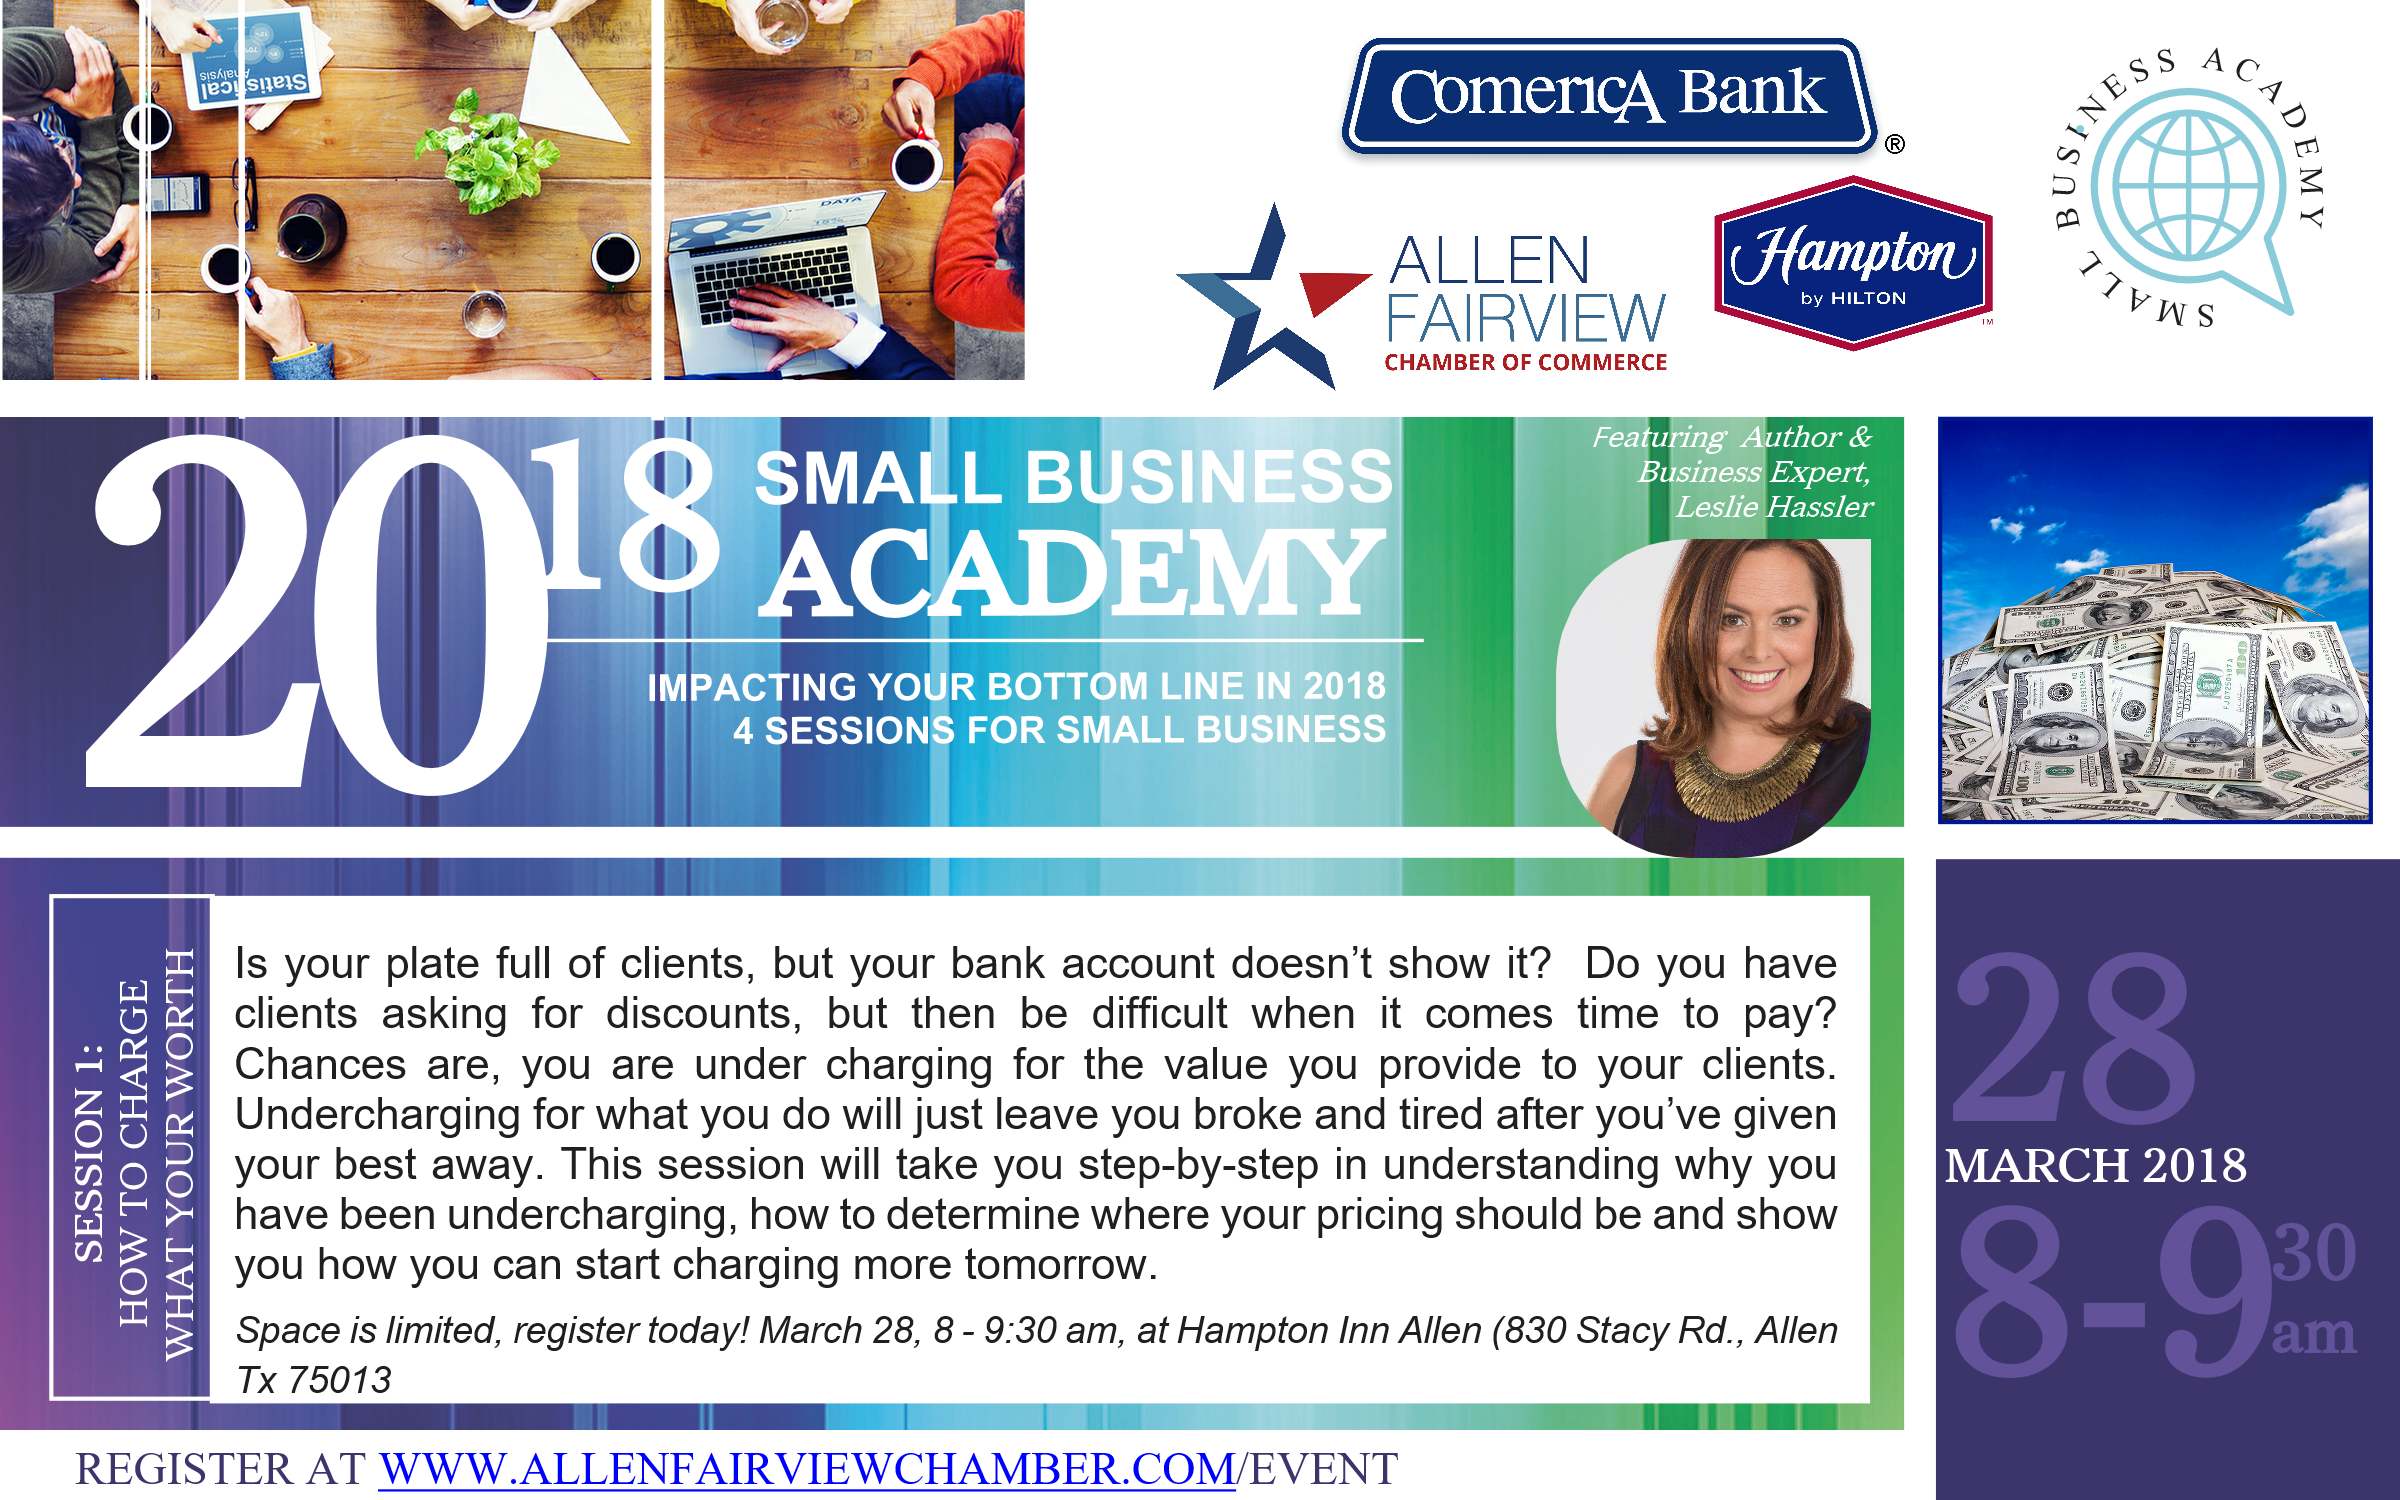 2018 Small Business Academy